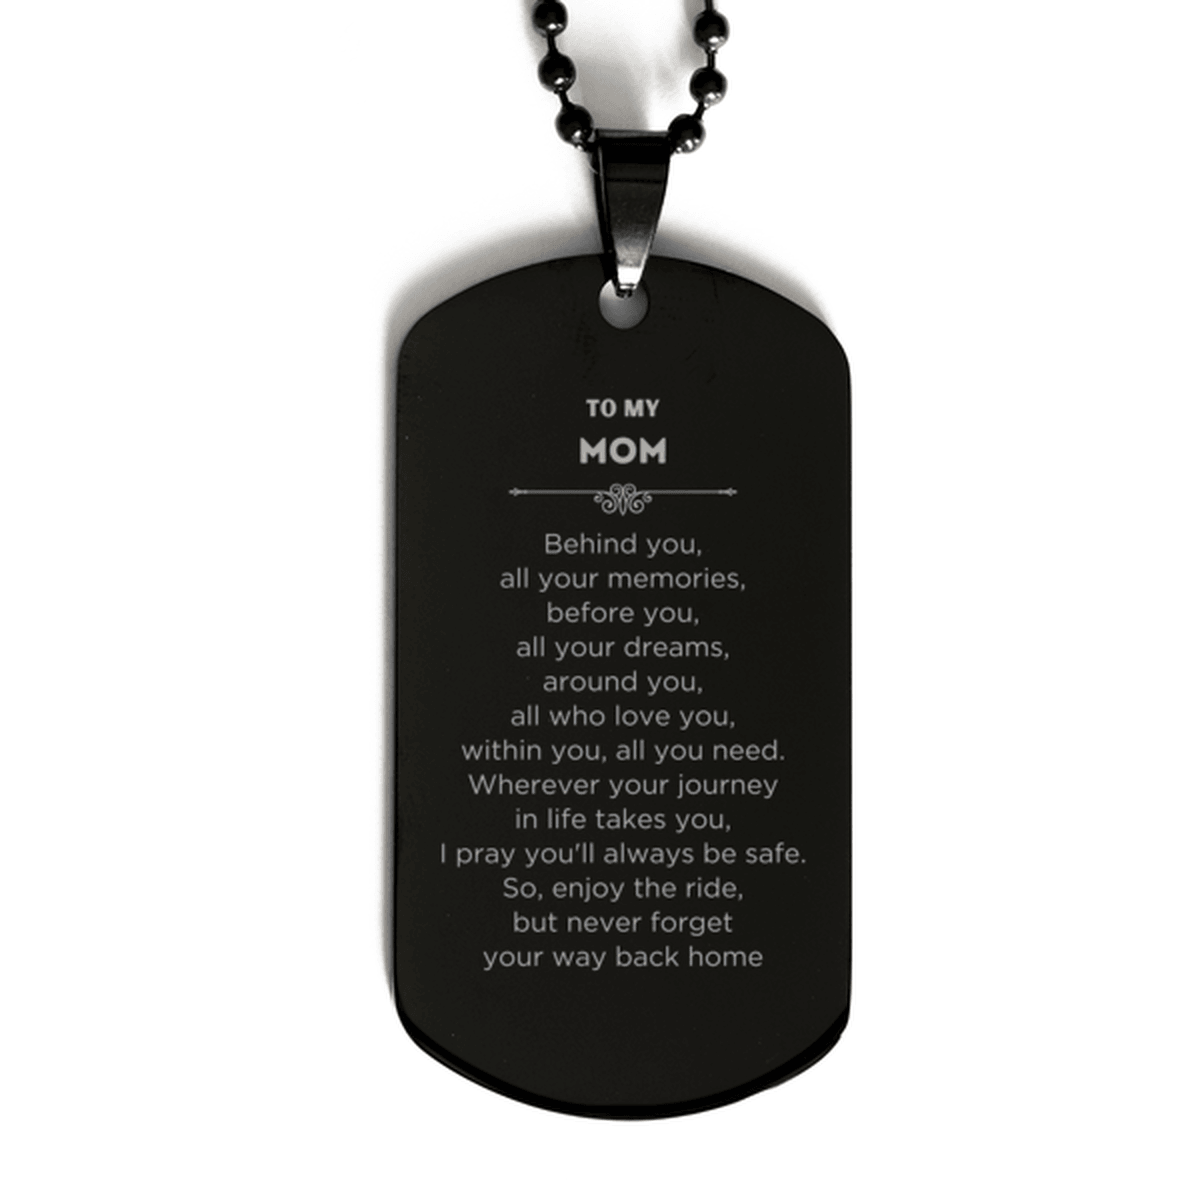 To My Mom Gifts, Inspirational Mom Black Dog Tag, Sentimental Birthday Christmas Unique Gifts For Mom Behind you, all your memories, before you, all your dreams, around you, all who love you, within you, all you need - Mallard Moon Gift Shop